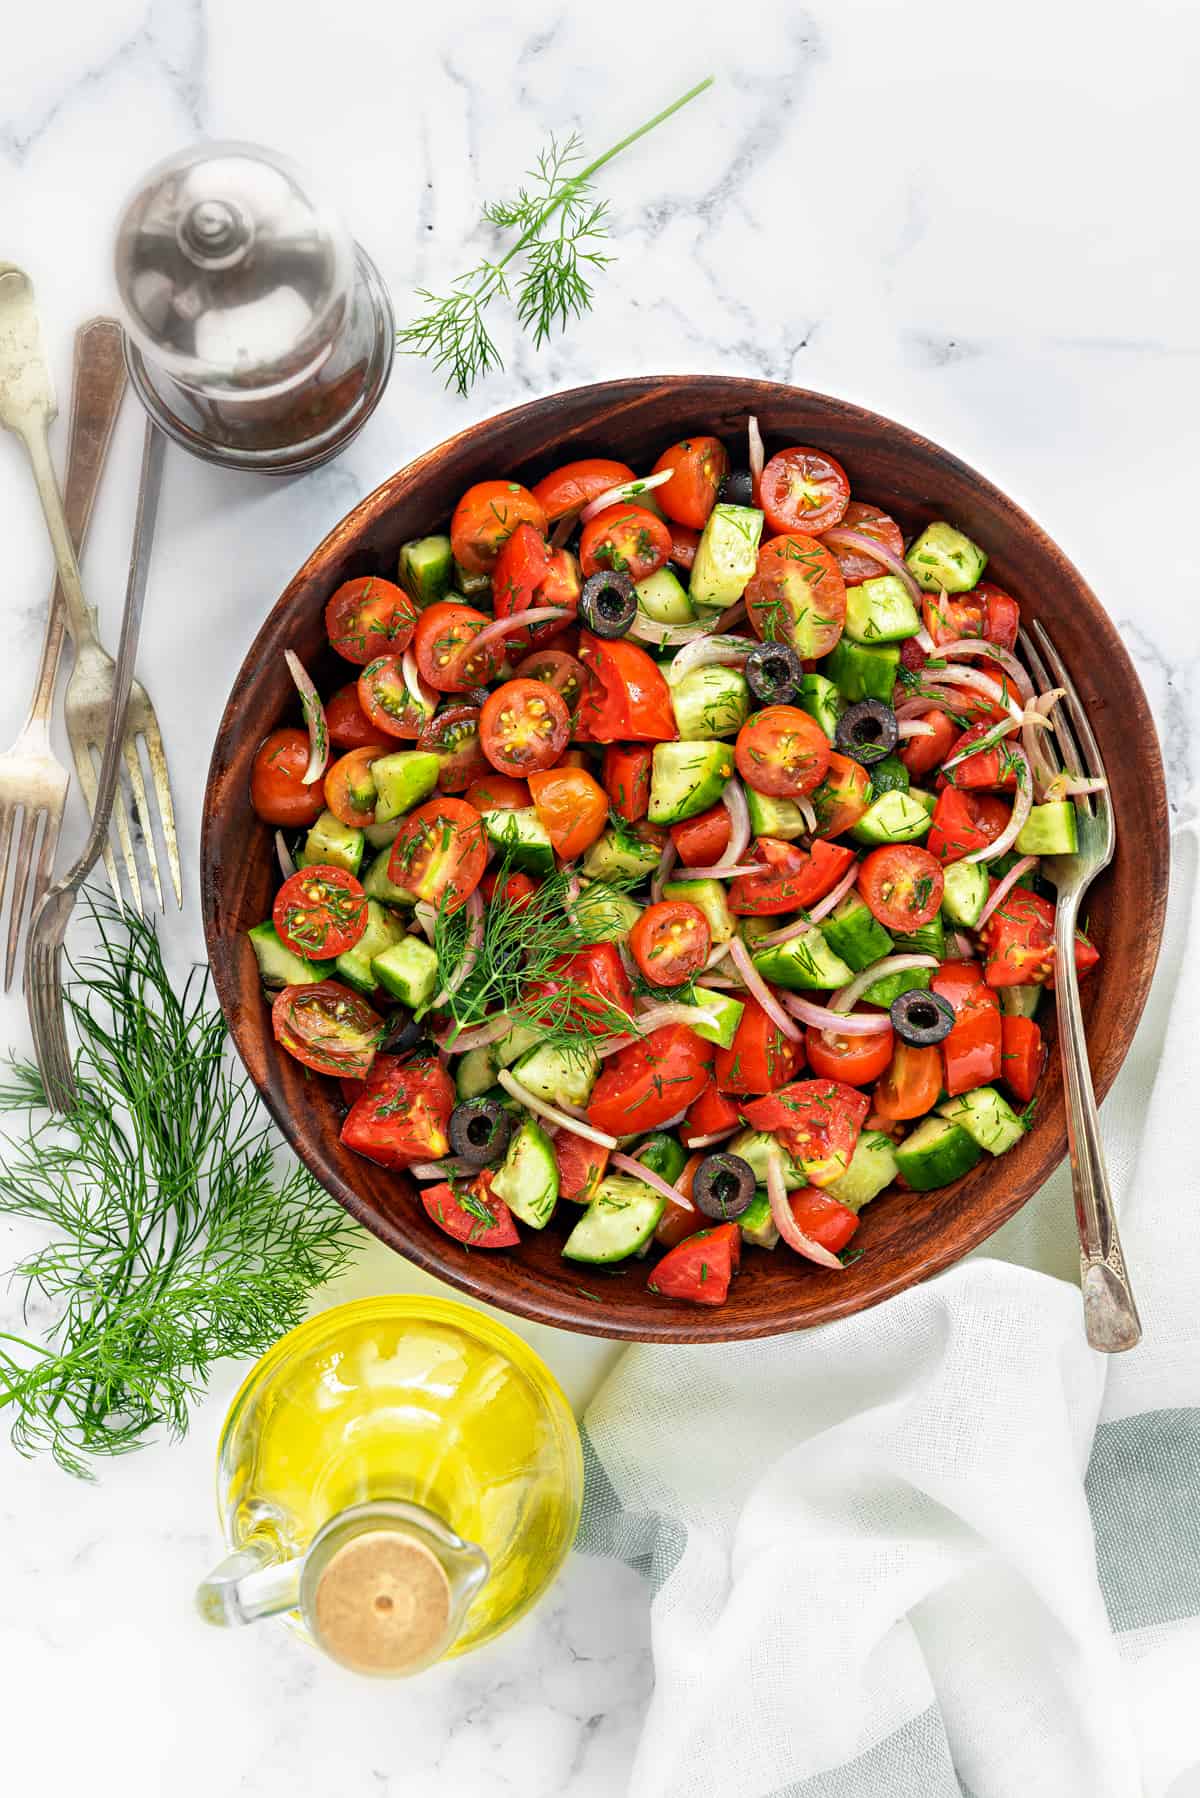 Healthy onion cucumber tomato salad in wooden bowl with fork in it and oil bottle on side.